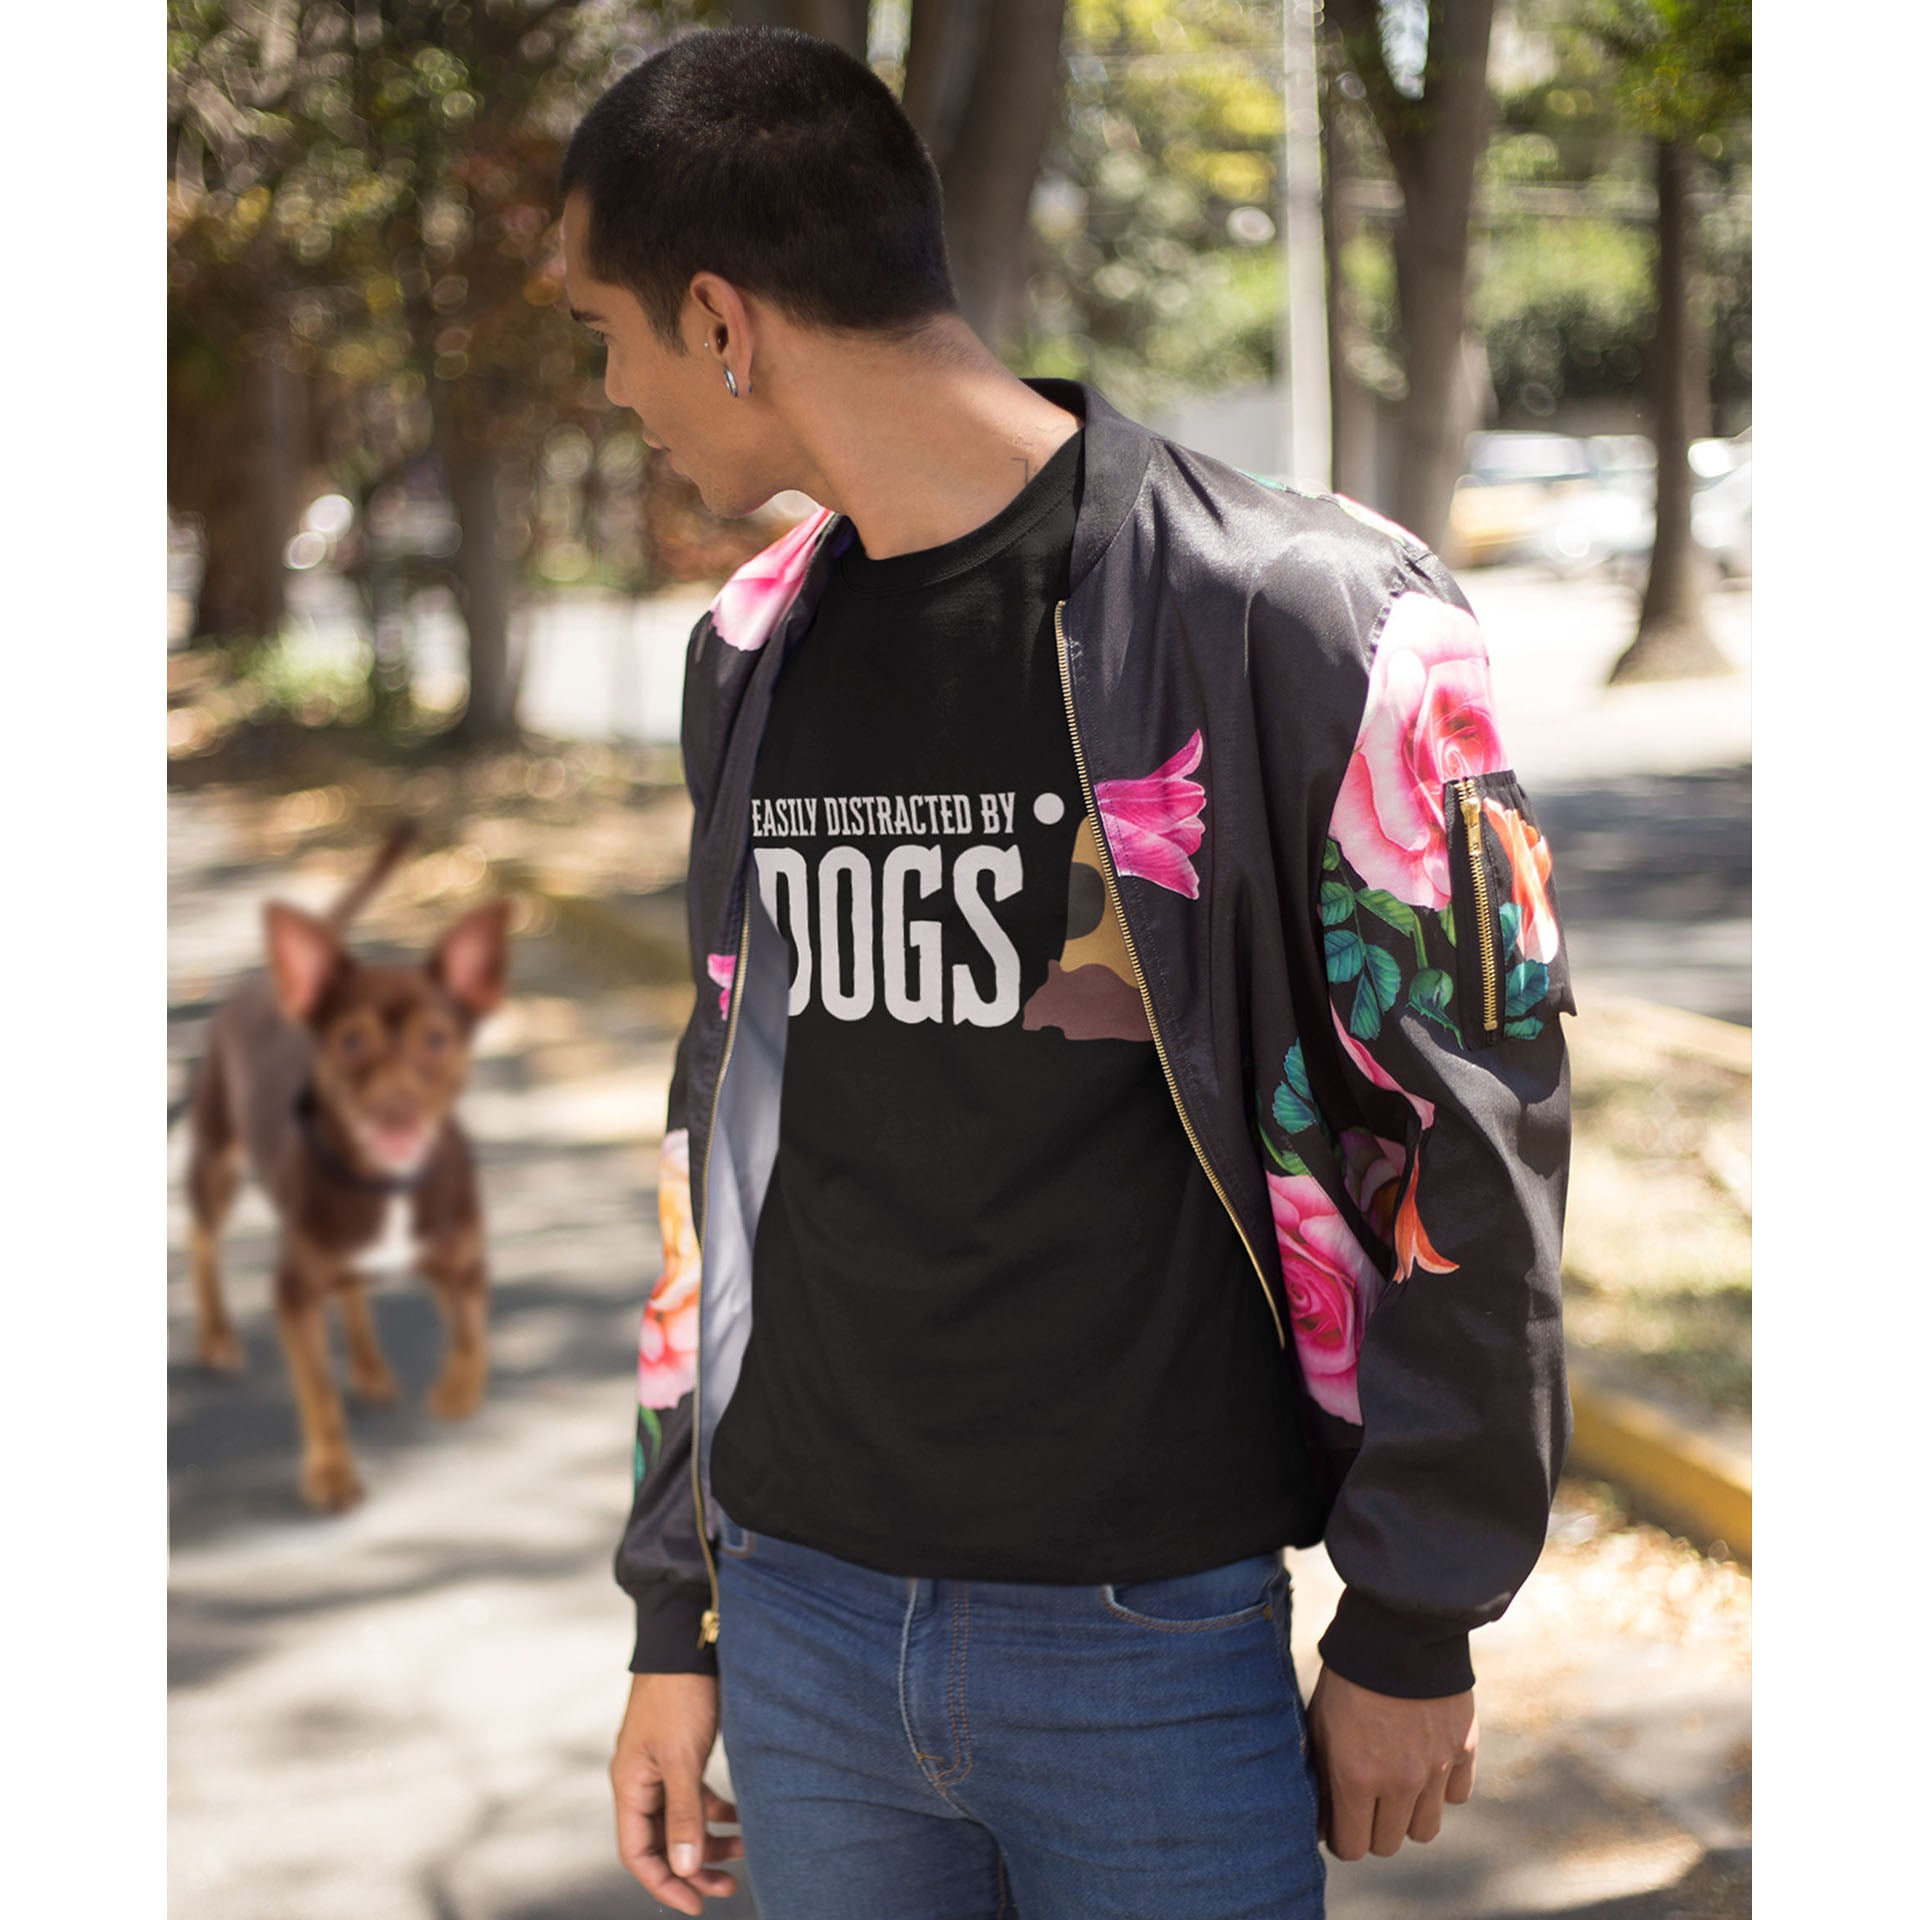 A man, dressed in a unisex black 'Dogs Pure Love, Easily Distracted by Dogs' sweatshirt and a floral jacket, turns to find a dog following him along a pathway.